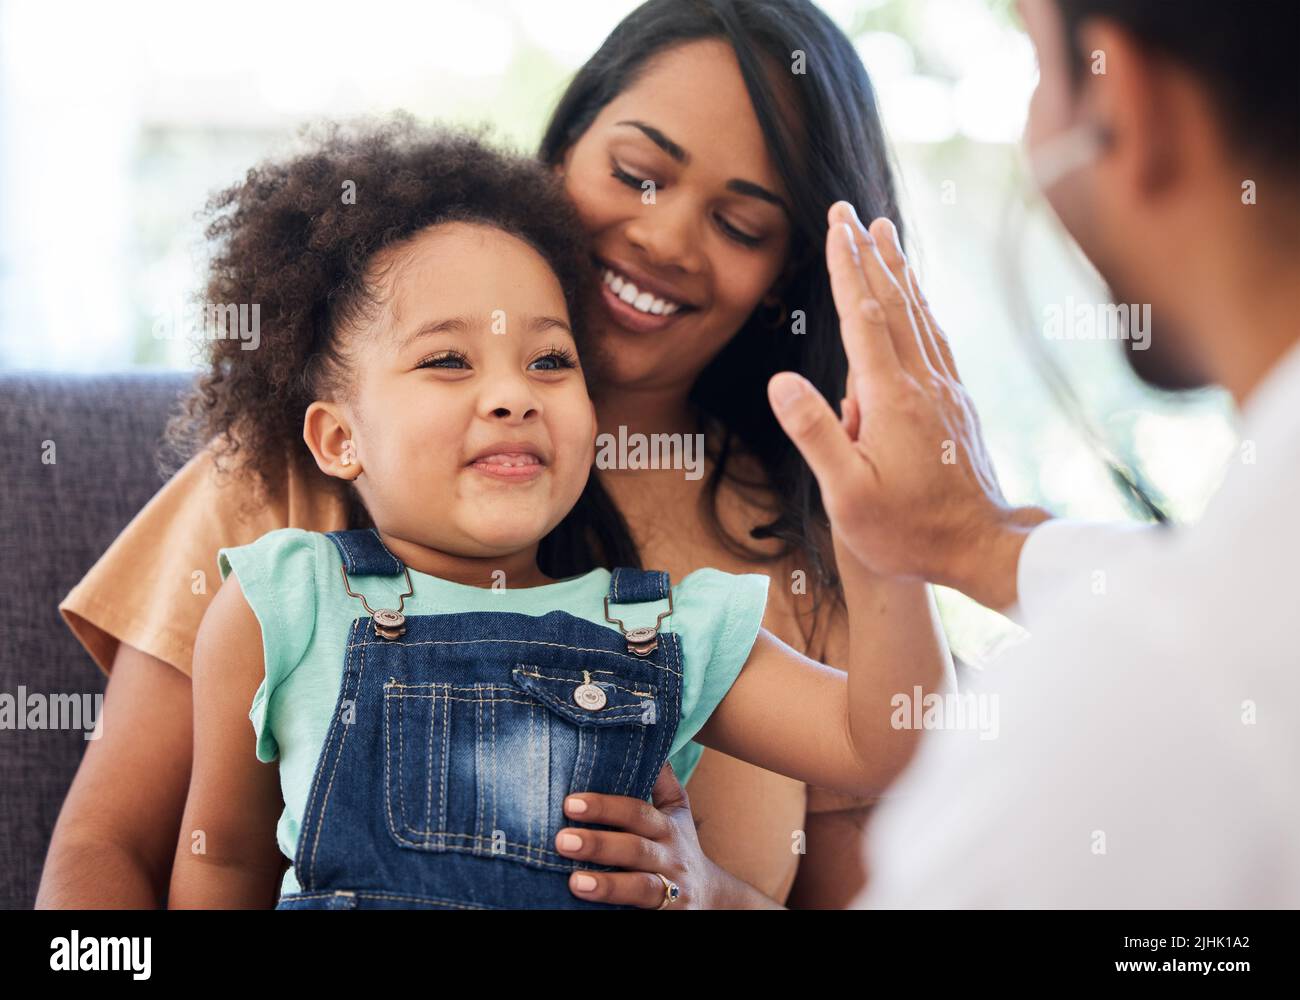 What a good checkup. a little girl sitting on her mothers lap while being examined by her doctor. Stock Photo